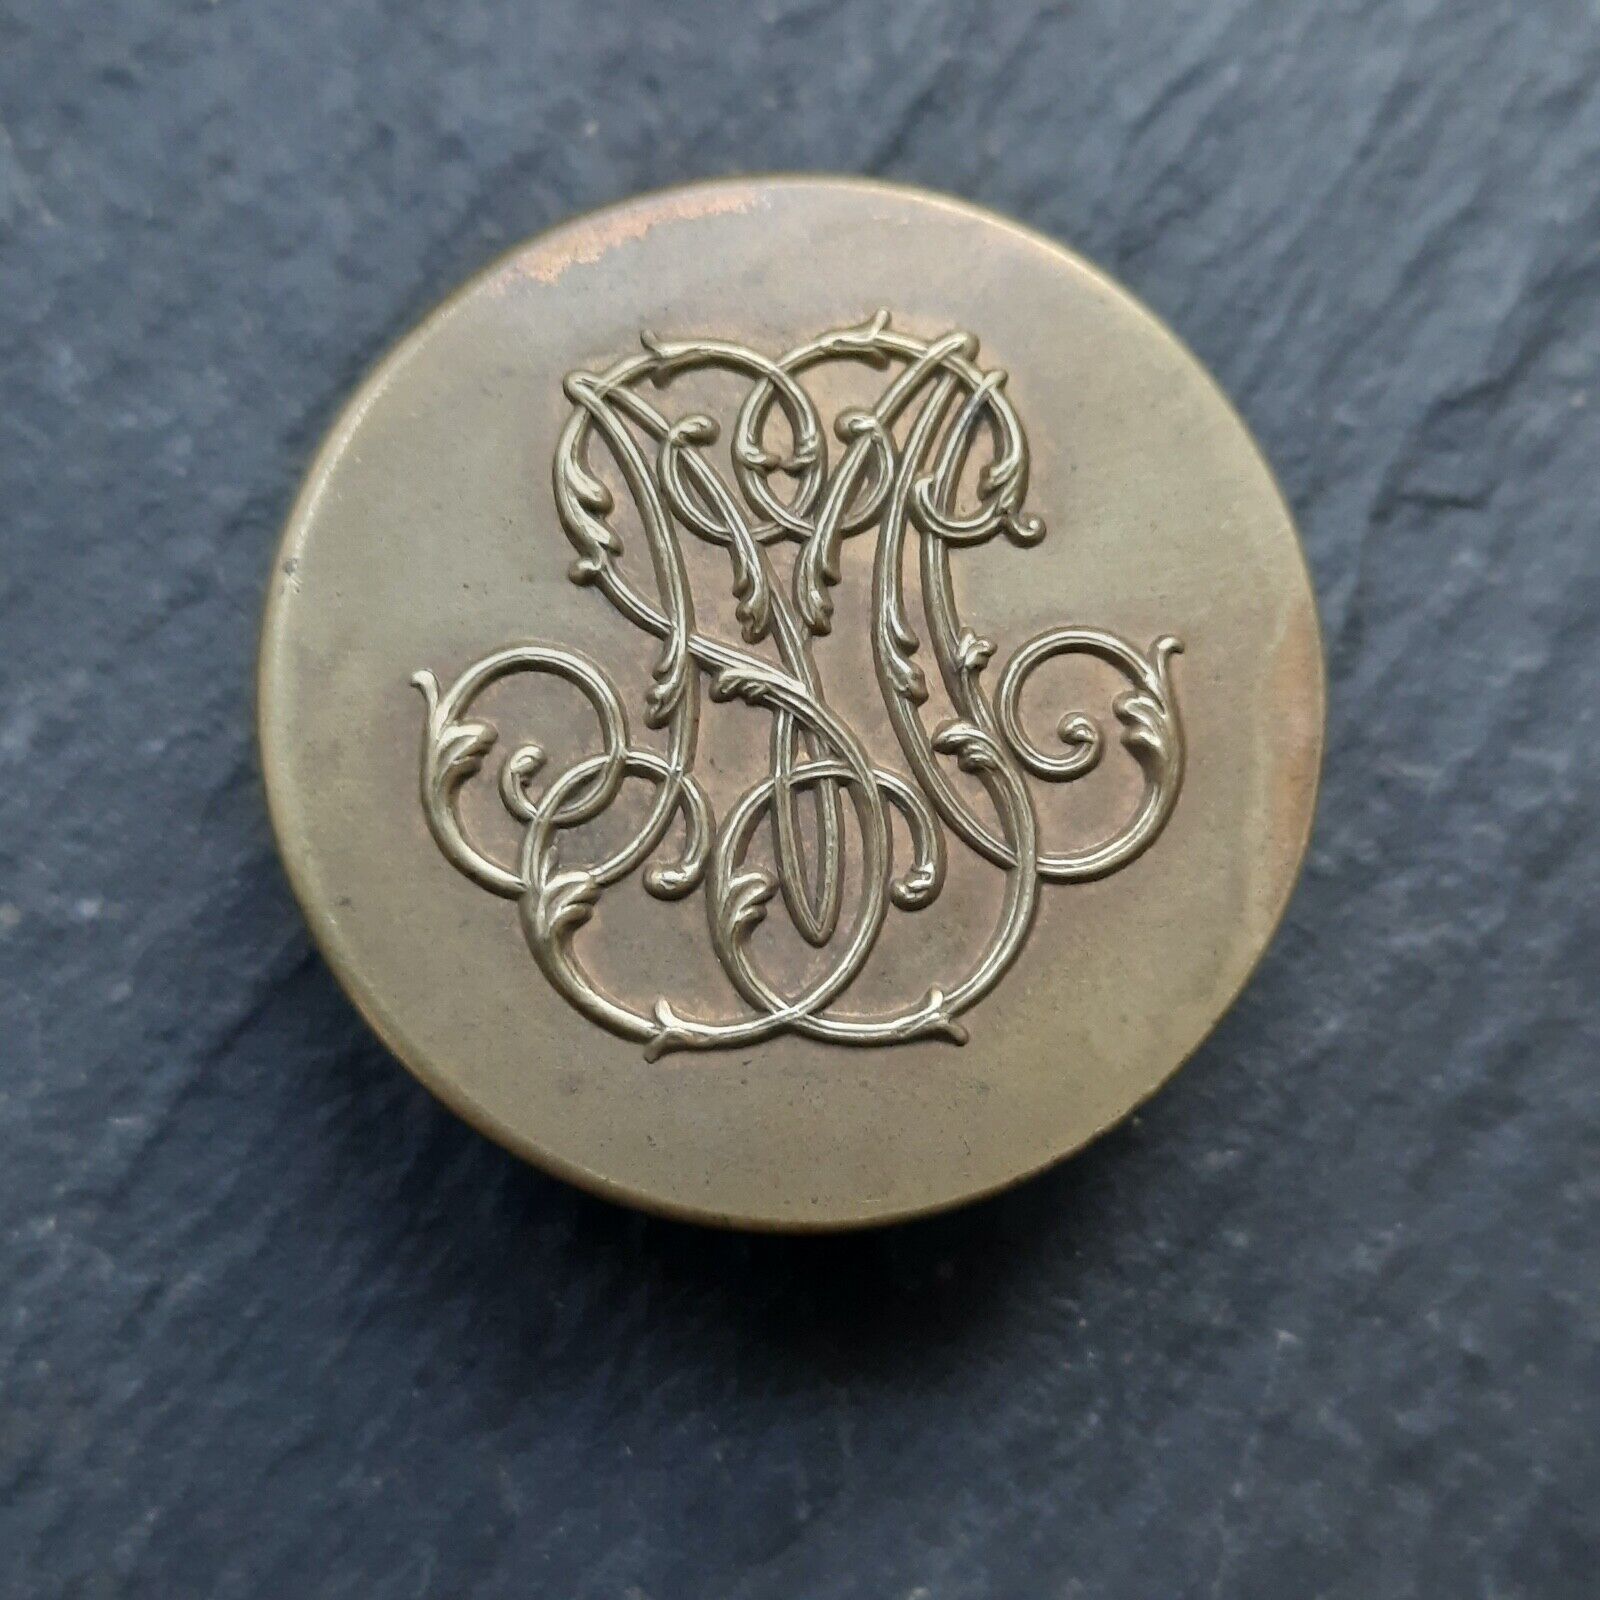 Antique Button Your Order Will Be Sent IN Encrypted Monogram 1 3/16in French